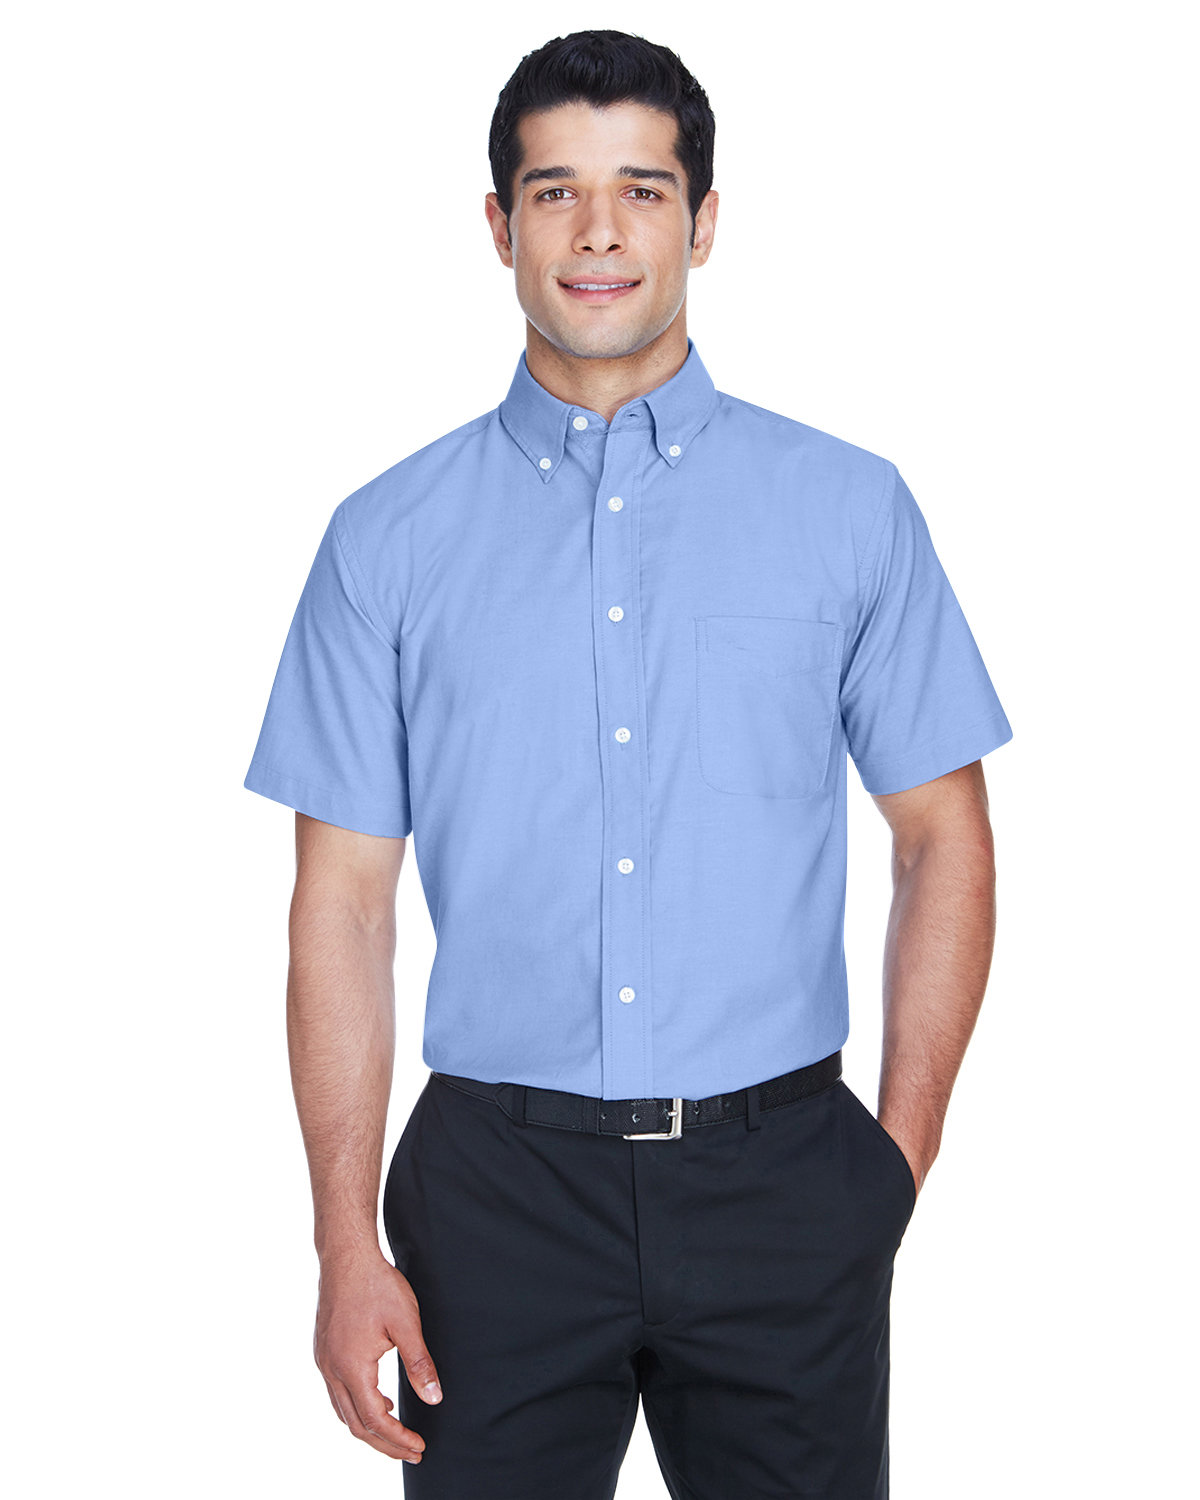 Harriton Men's Short-Sleeve Oxford with Stain-Release LIGHT BLUE 